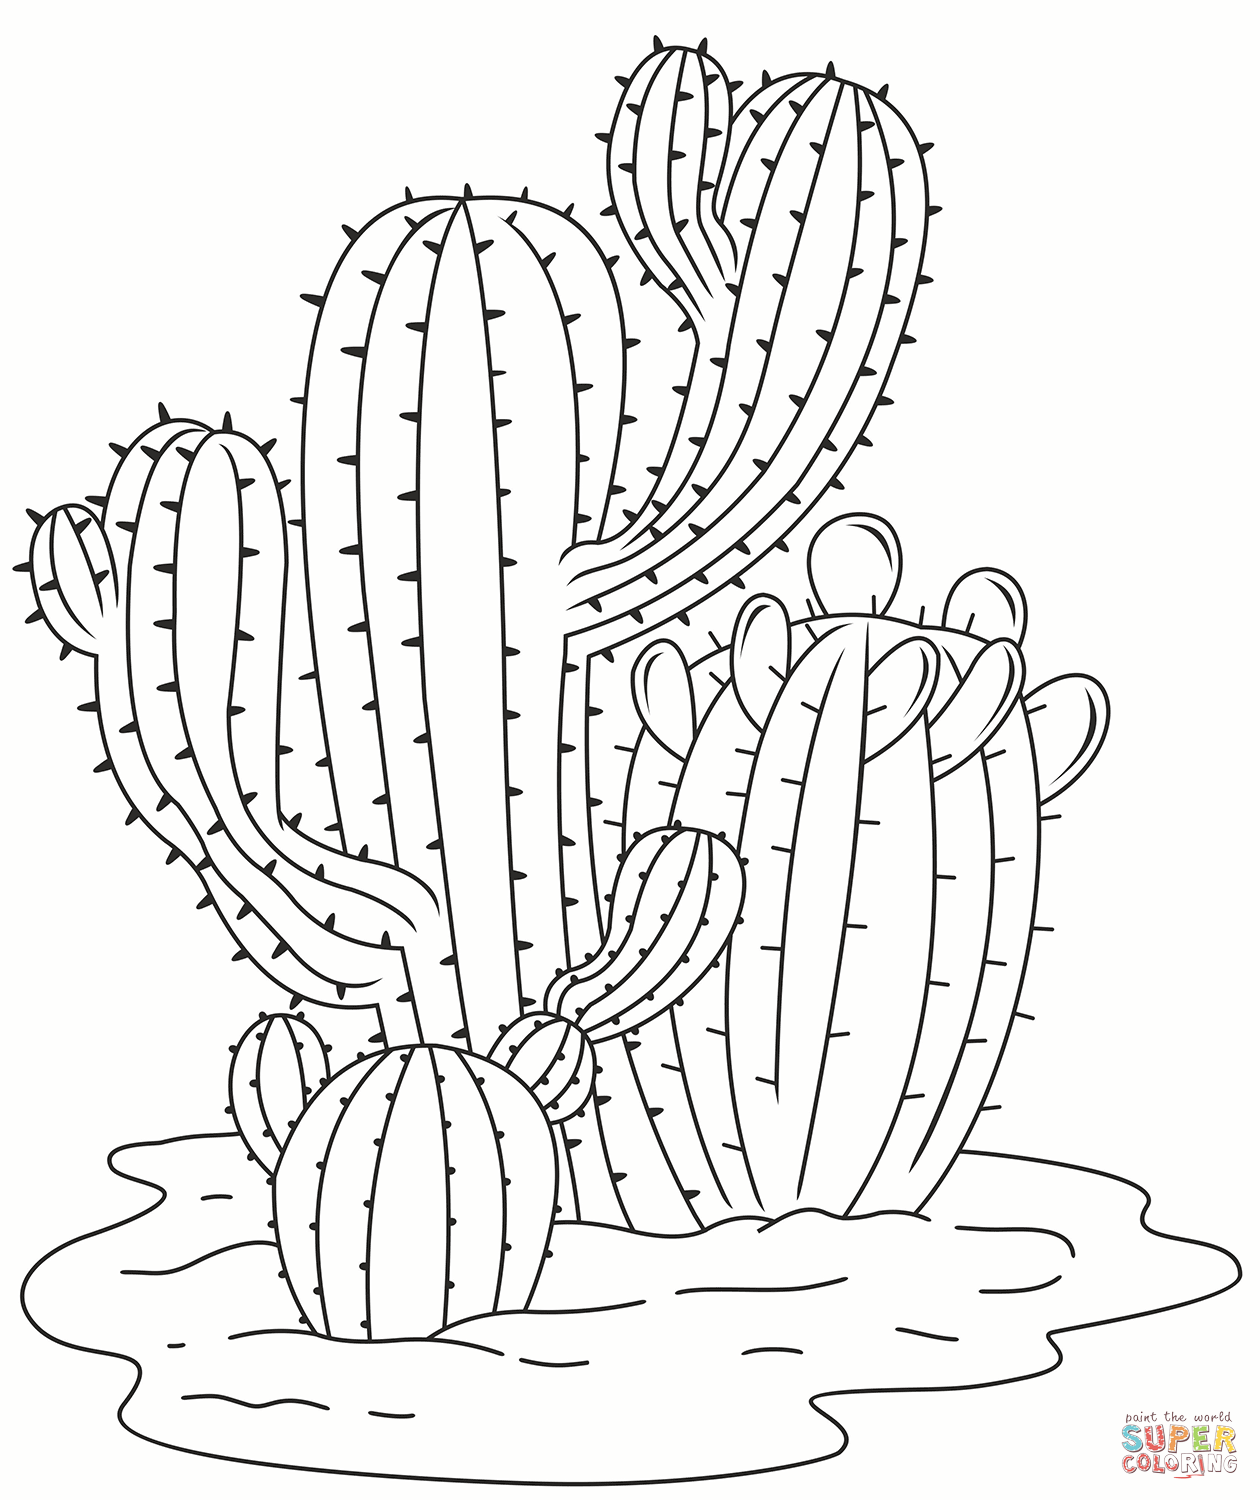 Cactus Coloring Pages.